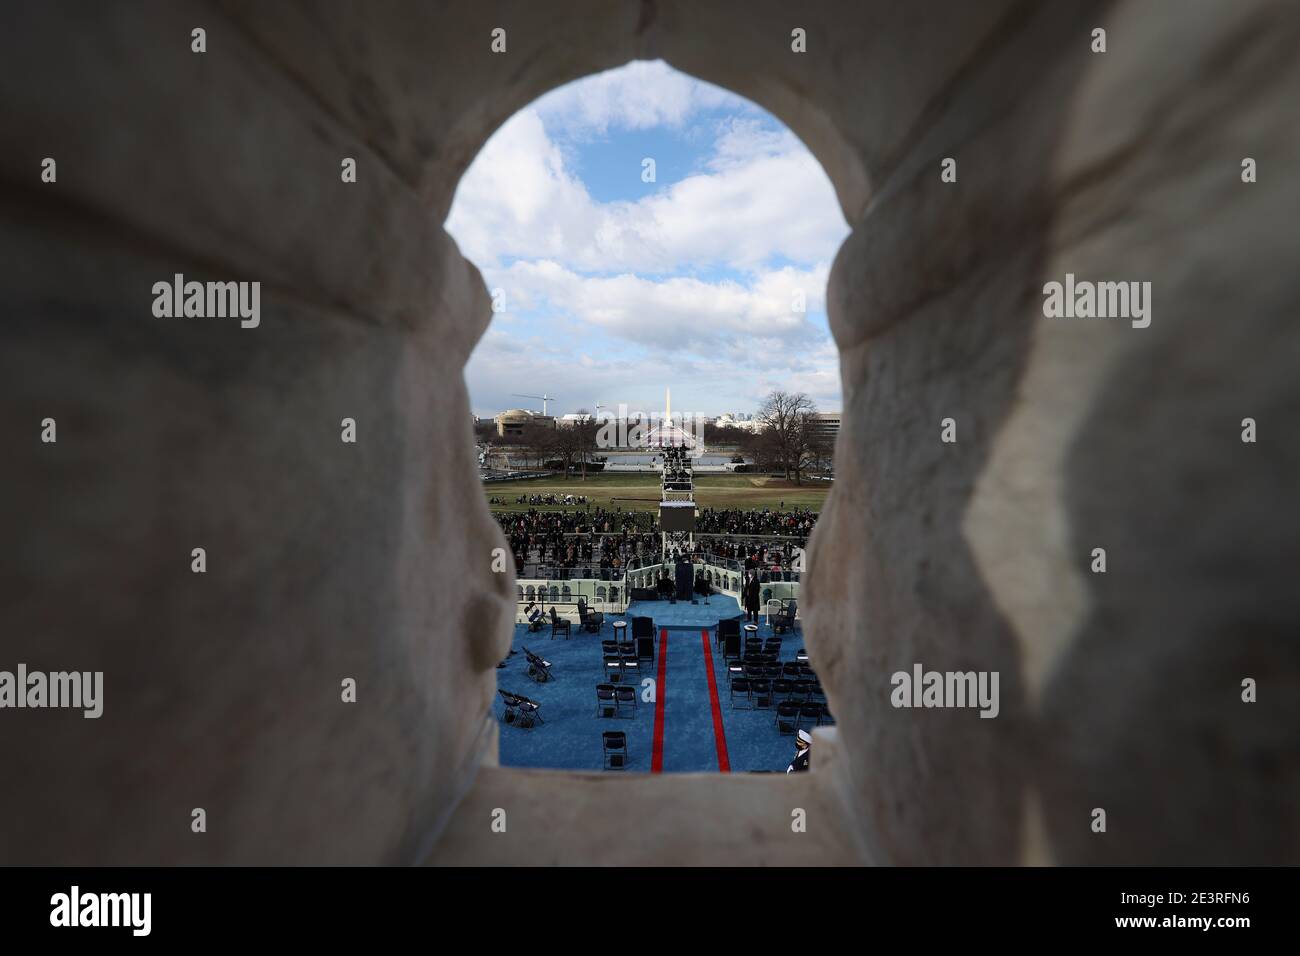 WASHINGTON, DC - JANUARY 20: A general view as attendees arrive to the inauguration of U.S. President-elect Joe Biden on the West Front of the U.S. Capitol on January 20, 2021 in Washington, DC.  During today's inauguration ceremony Joe Biden becomes the 46th president of the United States. Credit: Tasos Katopodis / Pool via CNP / MediaPunch Stock Photo